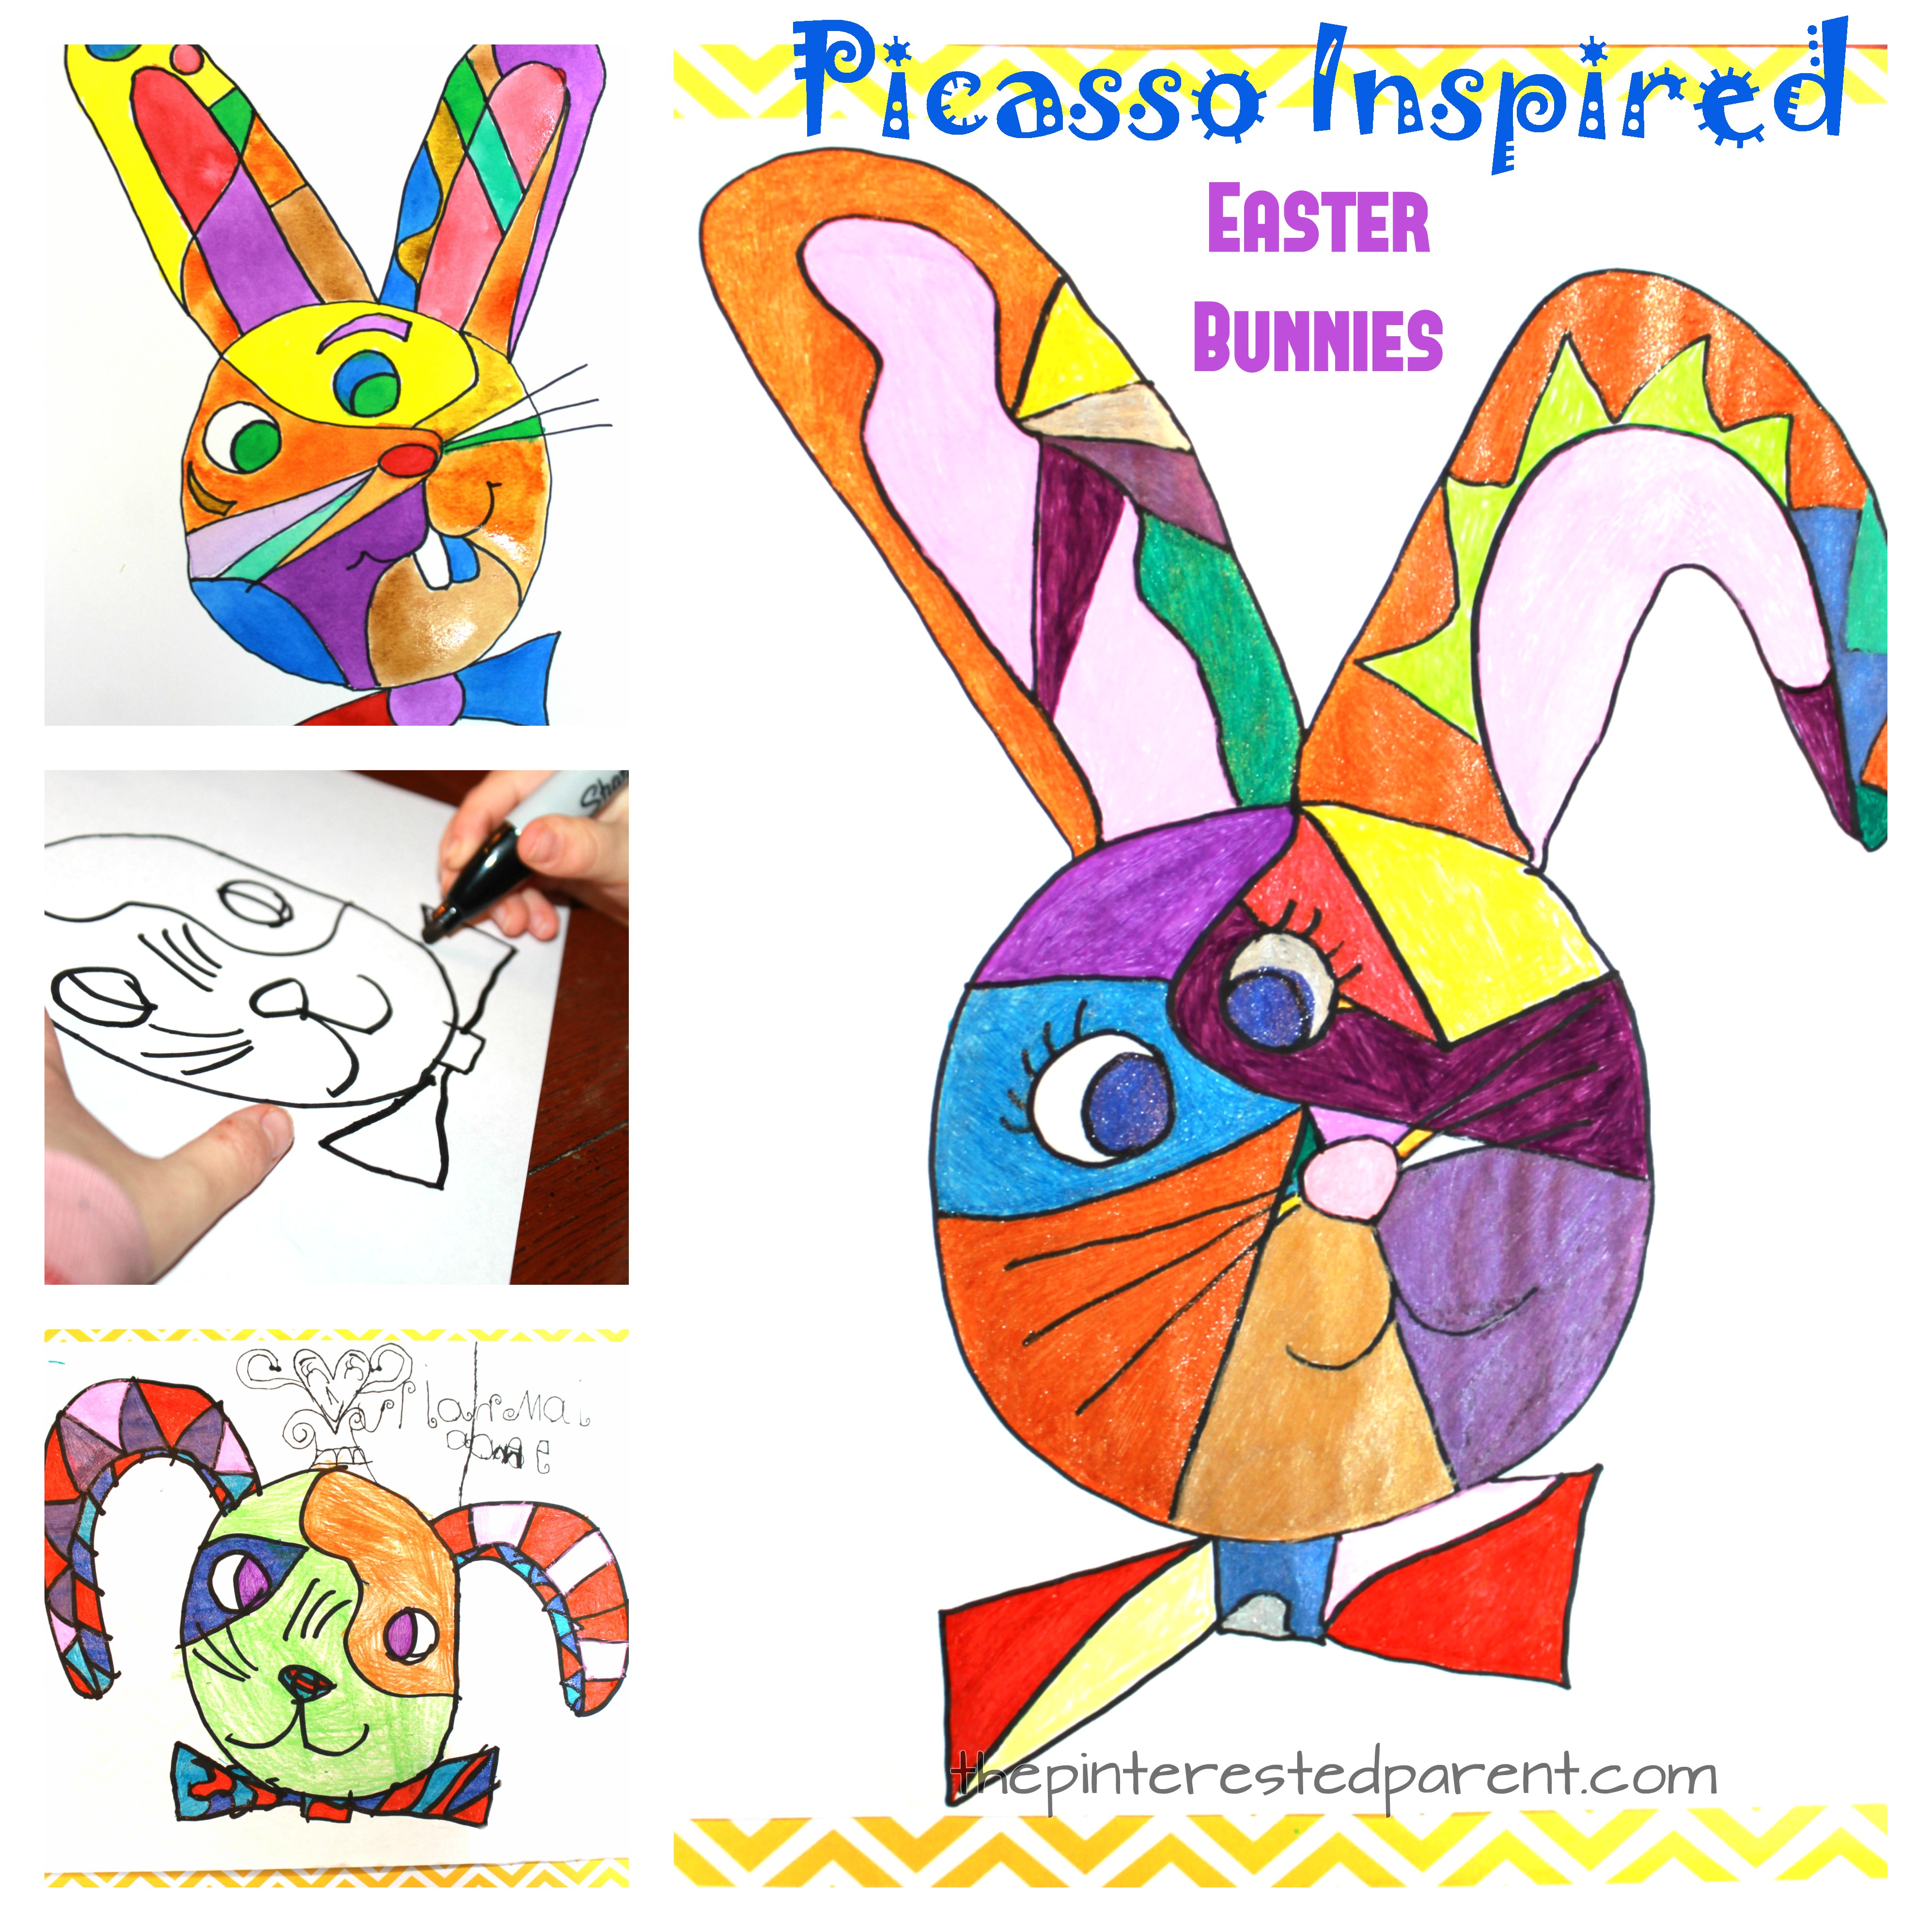 Picasso inspired Easter bunny art project. Easter arts and crafts for kids. Artist inspired artwork